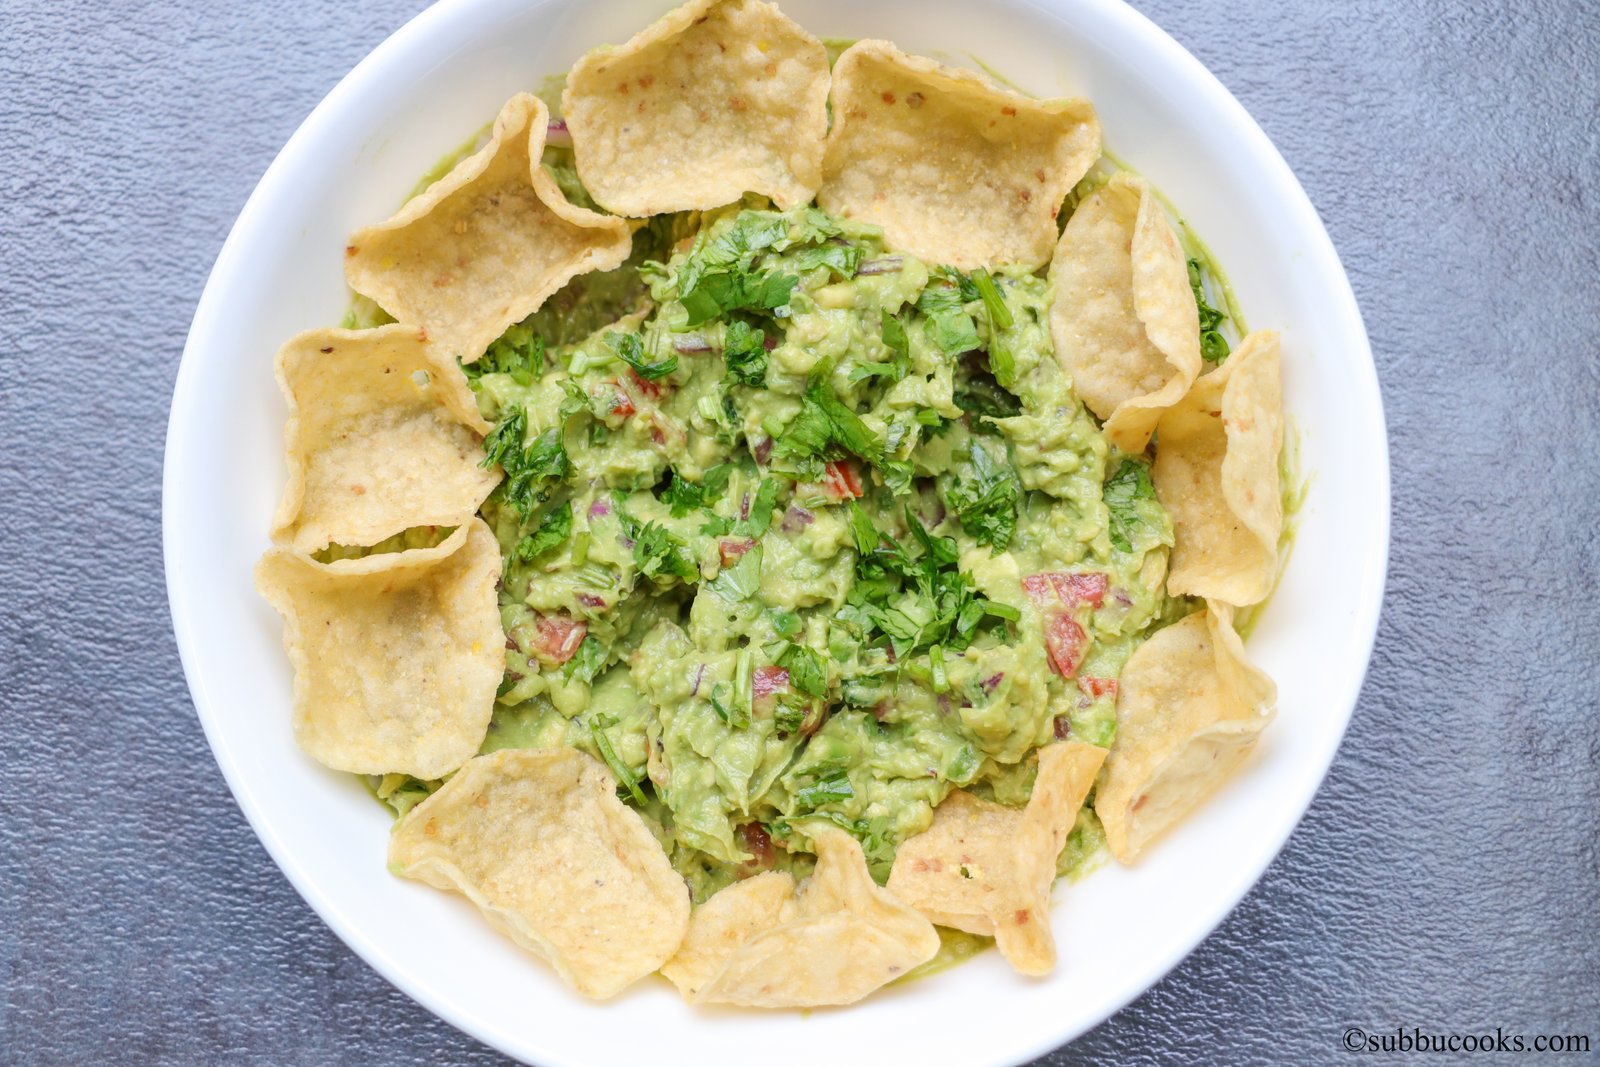 How to make fresh homemade Mexican Authentic Guacamole